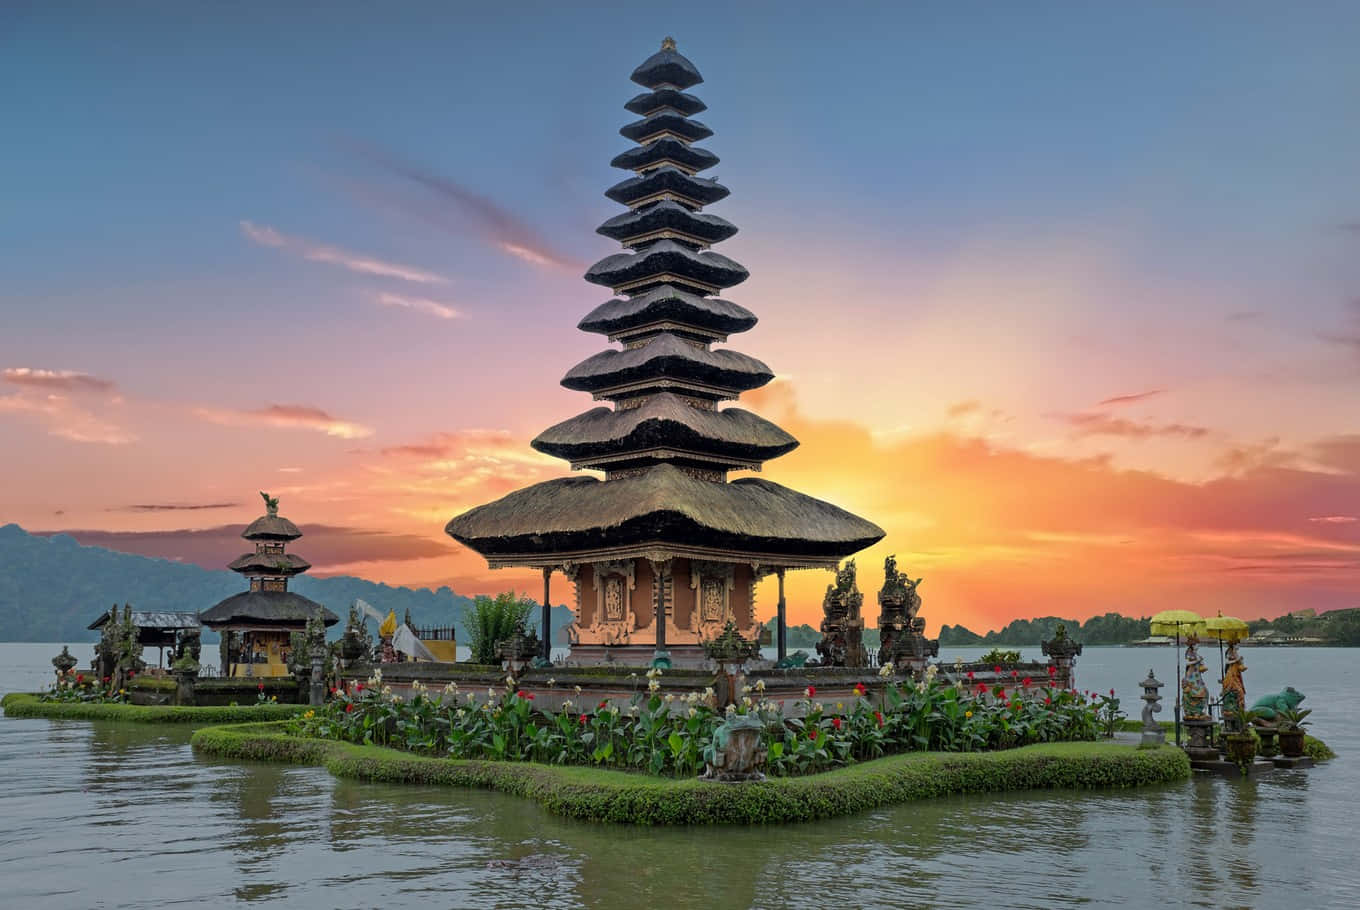 Magical views of one of the most beautiful places in the world - Bali